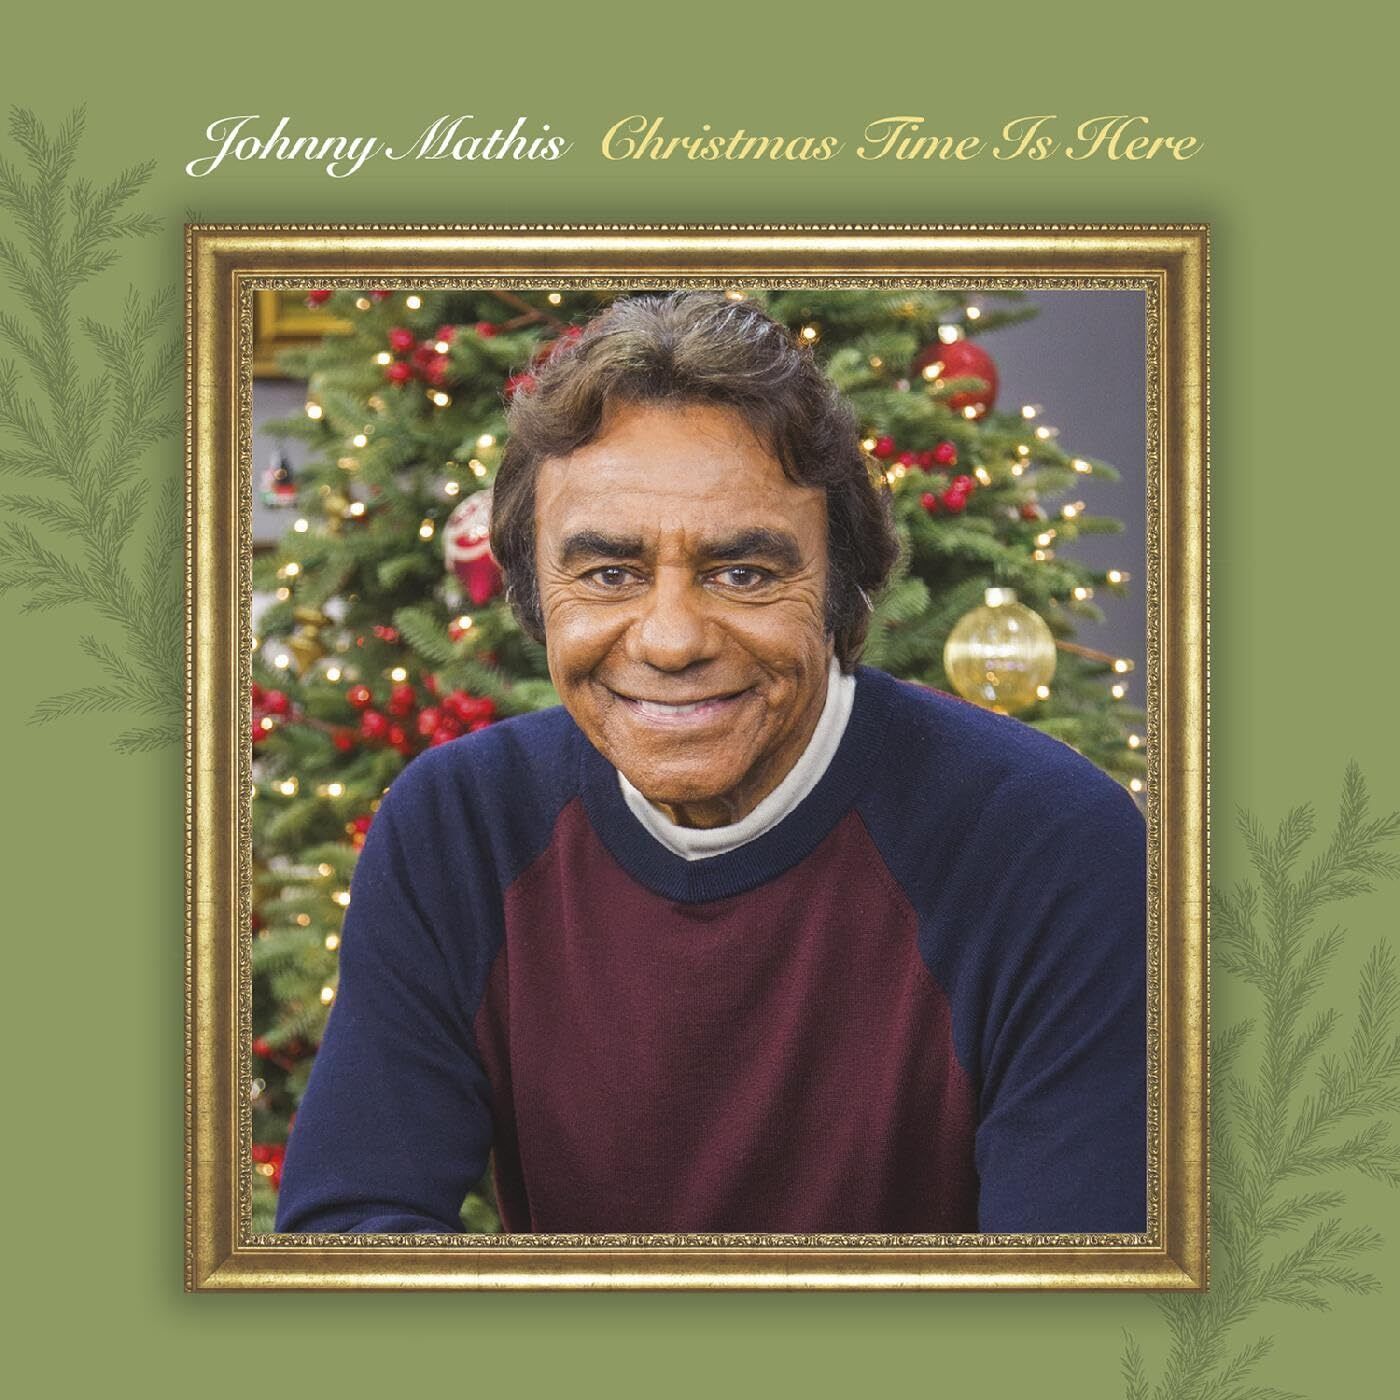 Johnny Mathis Christmas Time Is Here (Christmas Tree (Vinyl)